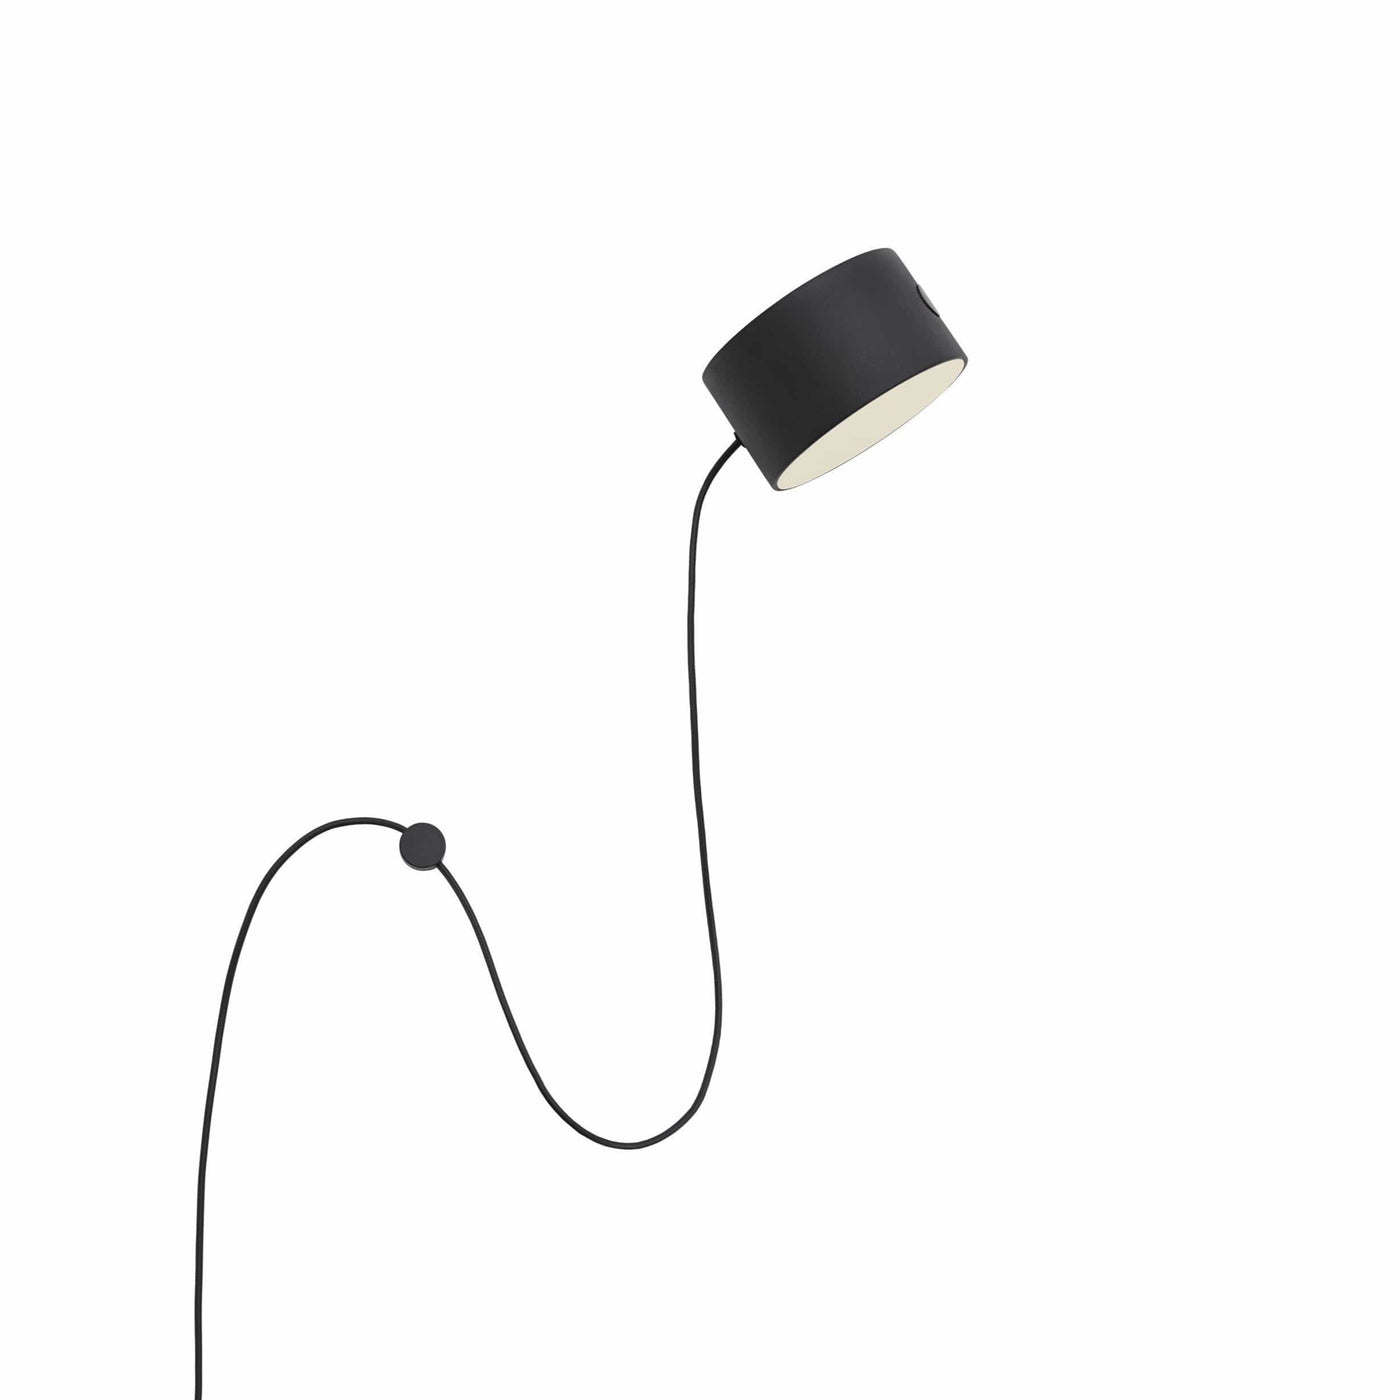 Muuto Post Wall Lamp in black, available from someday designs #colour_black